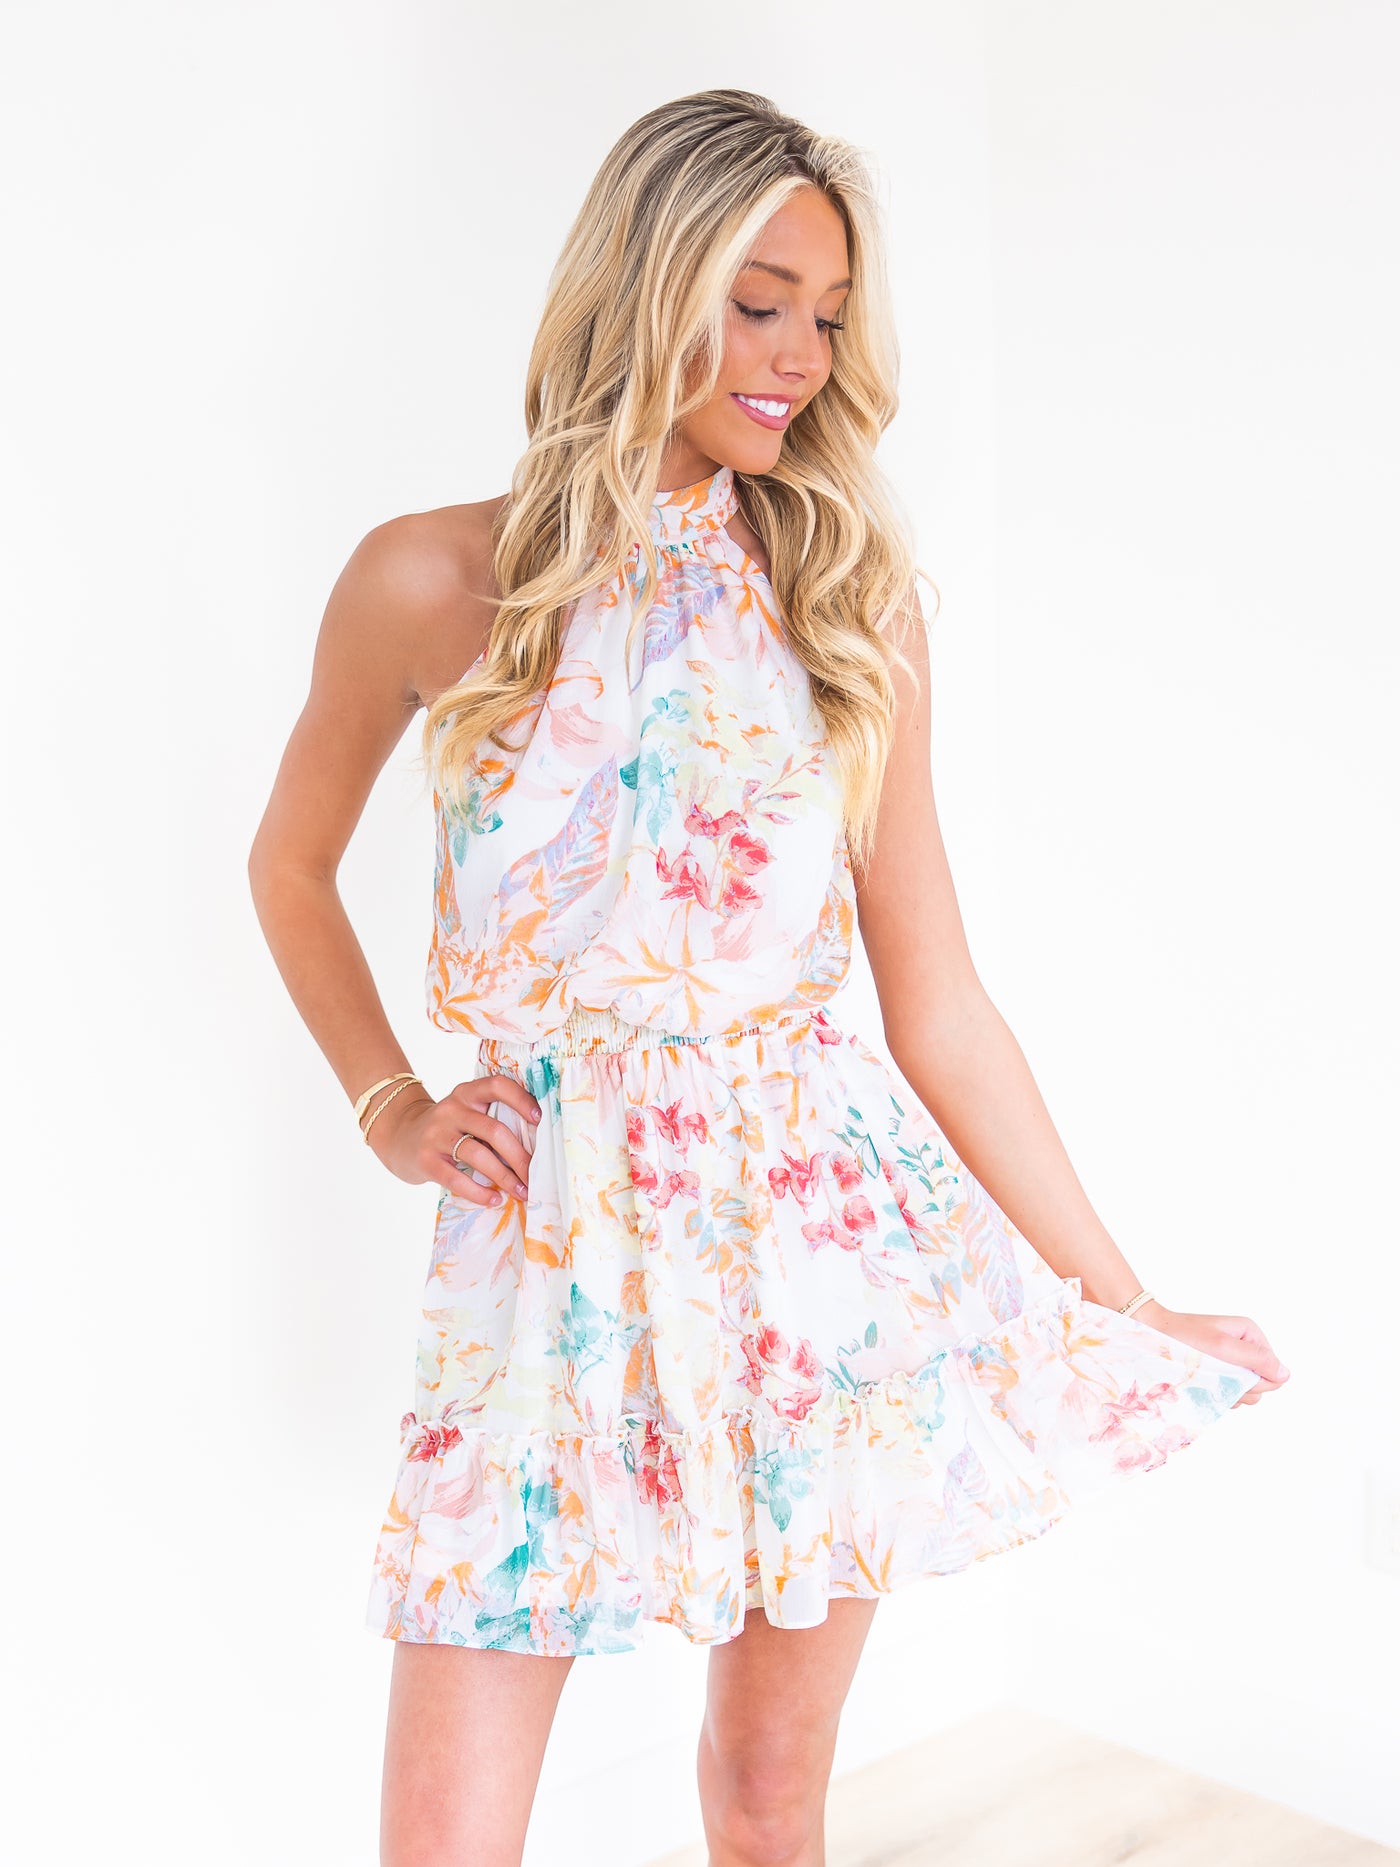 How You Know Floral Halter Dress